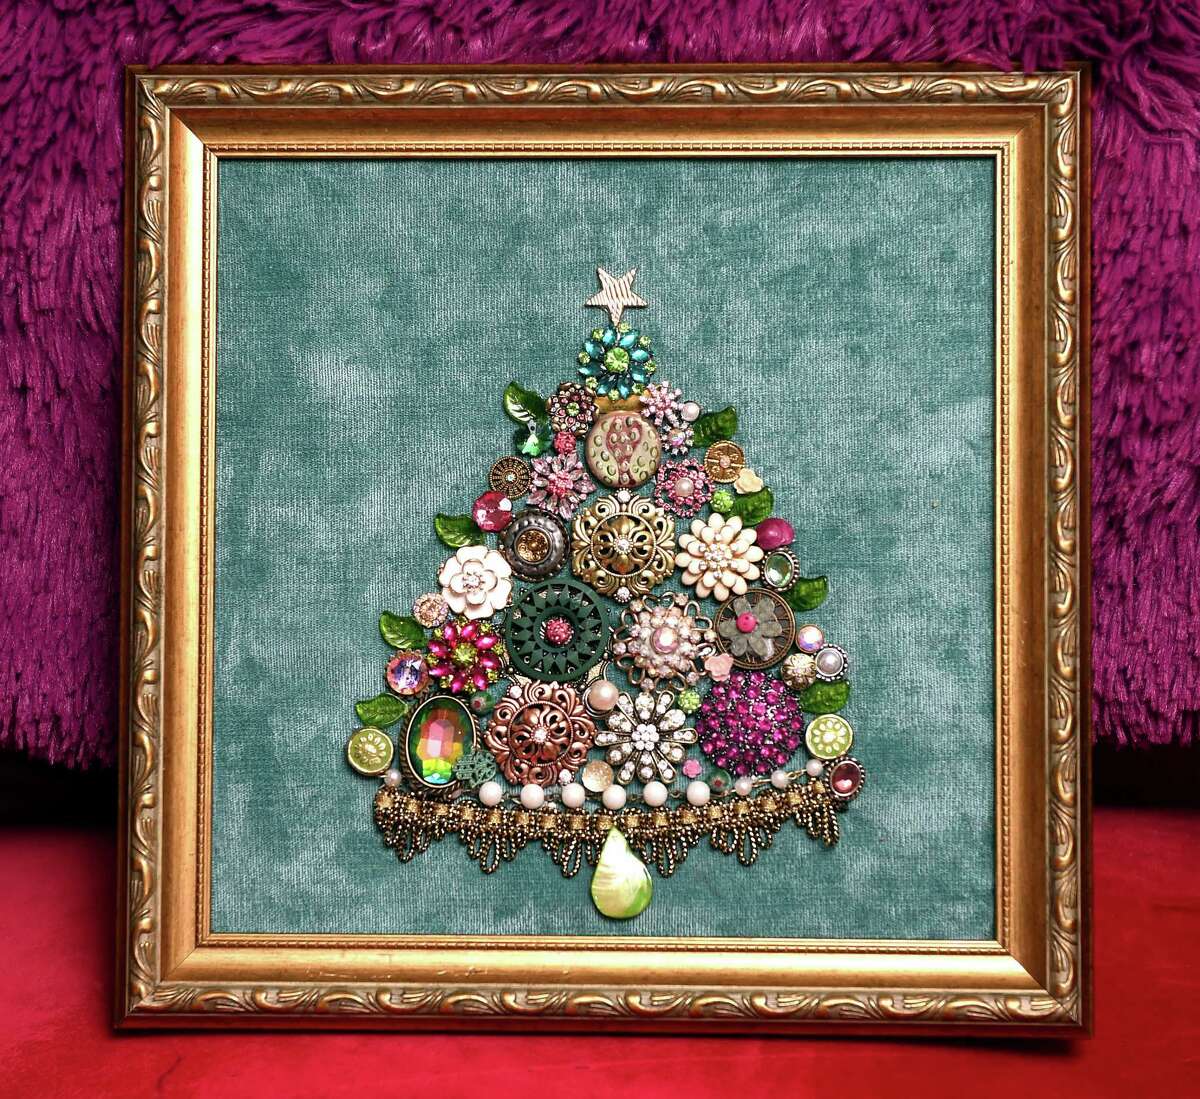 A Christmas tree made by Kristin Abalan of Branford from found brooches, buttons and other items.